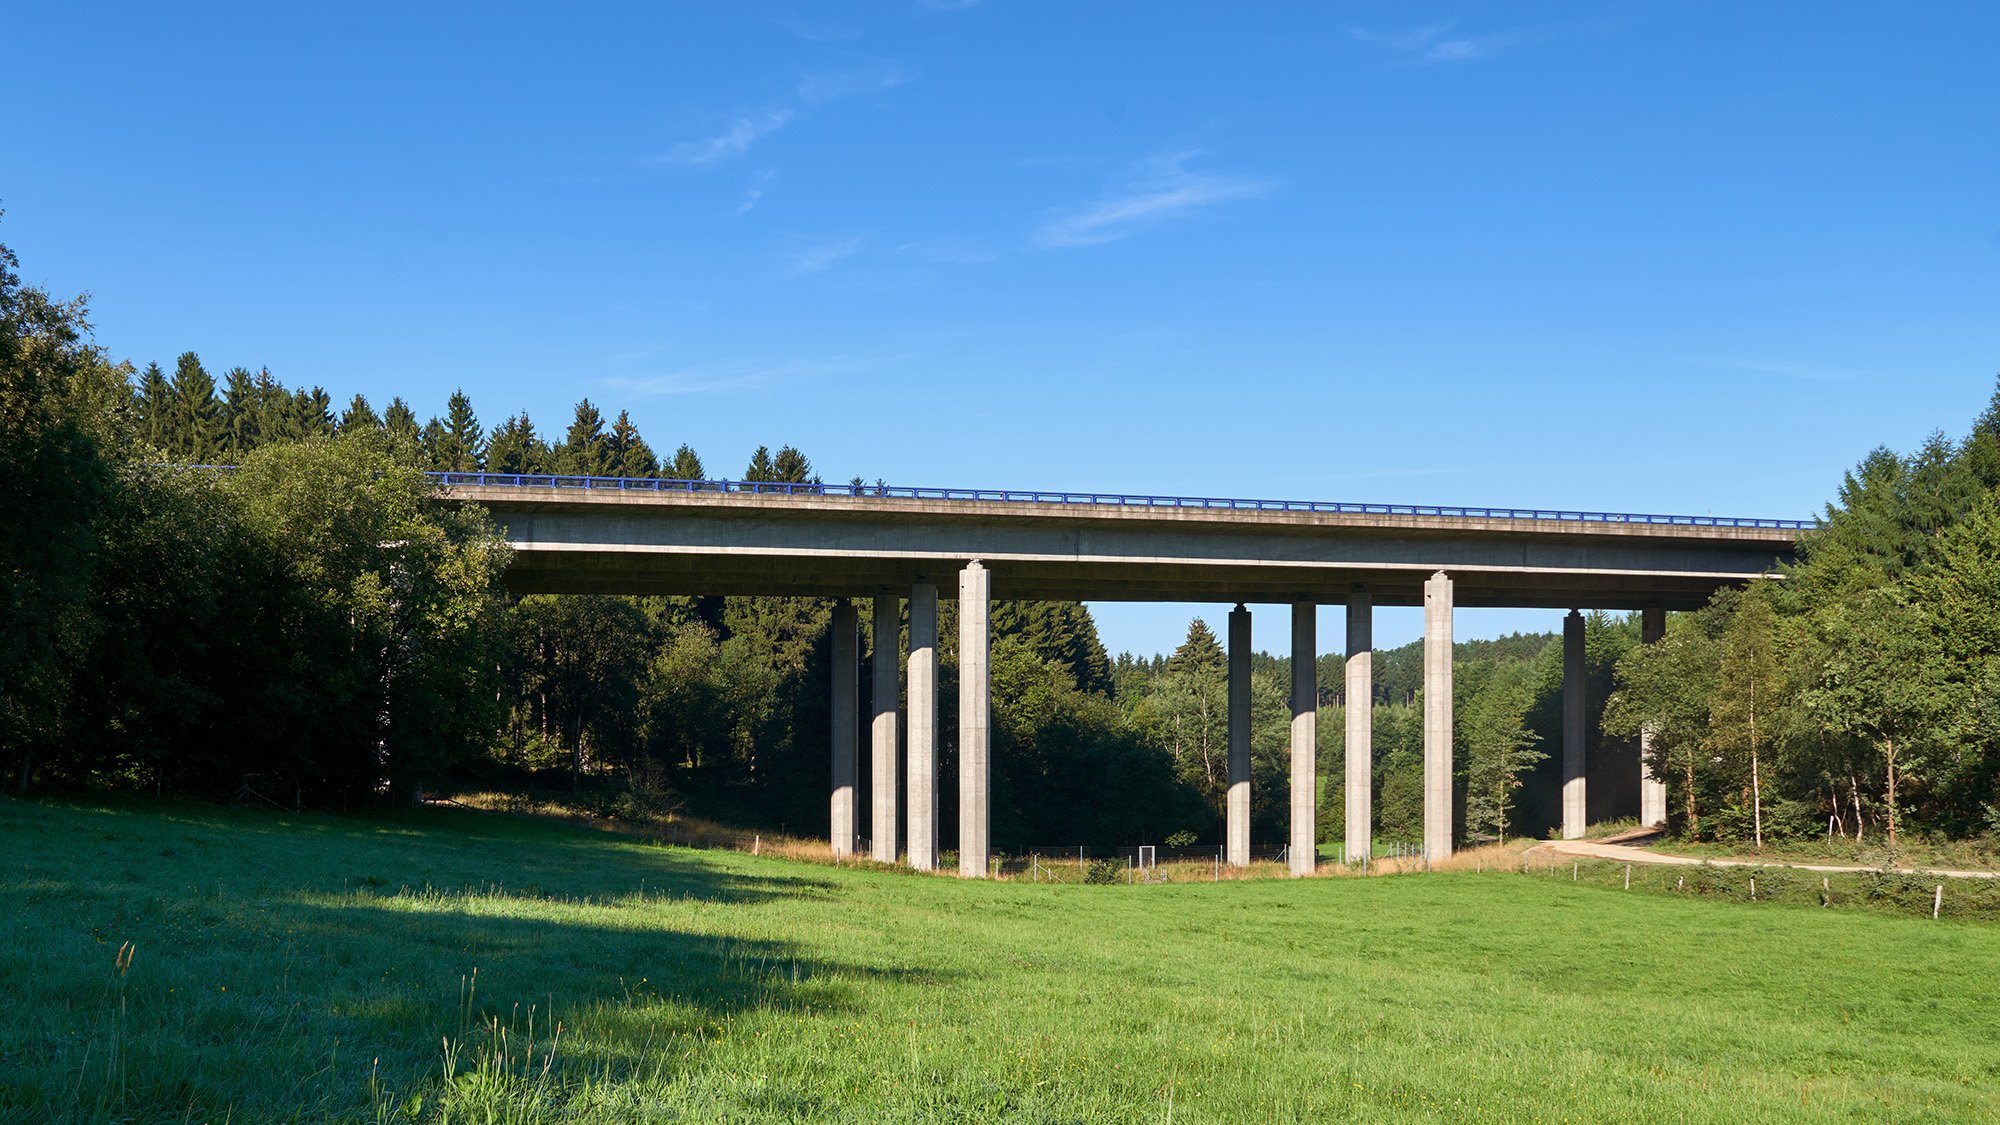 Front view of the Viaduct Ottfingenc. Credit: Ullrich 